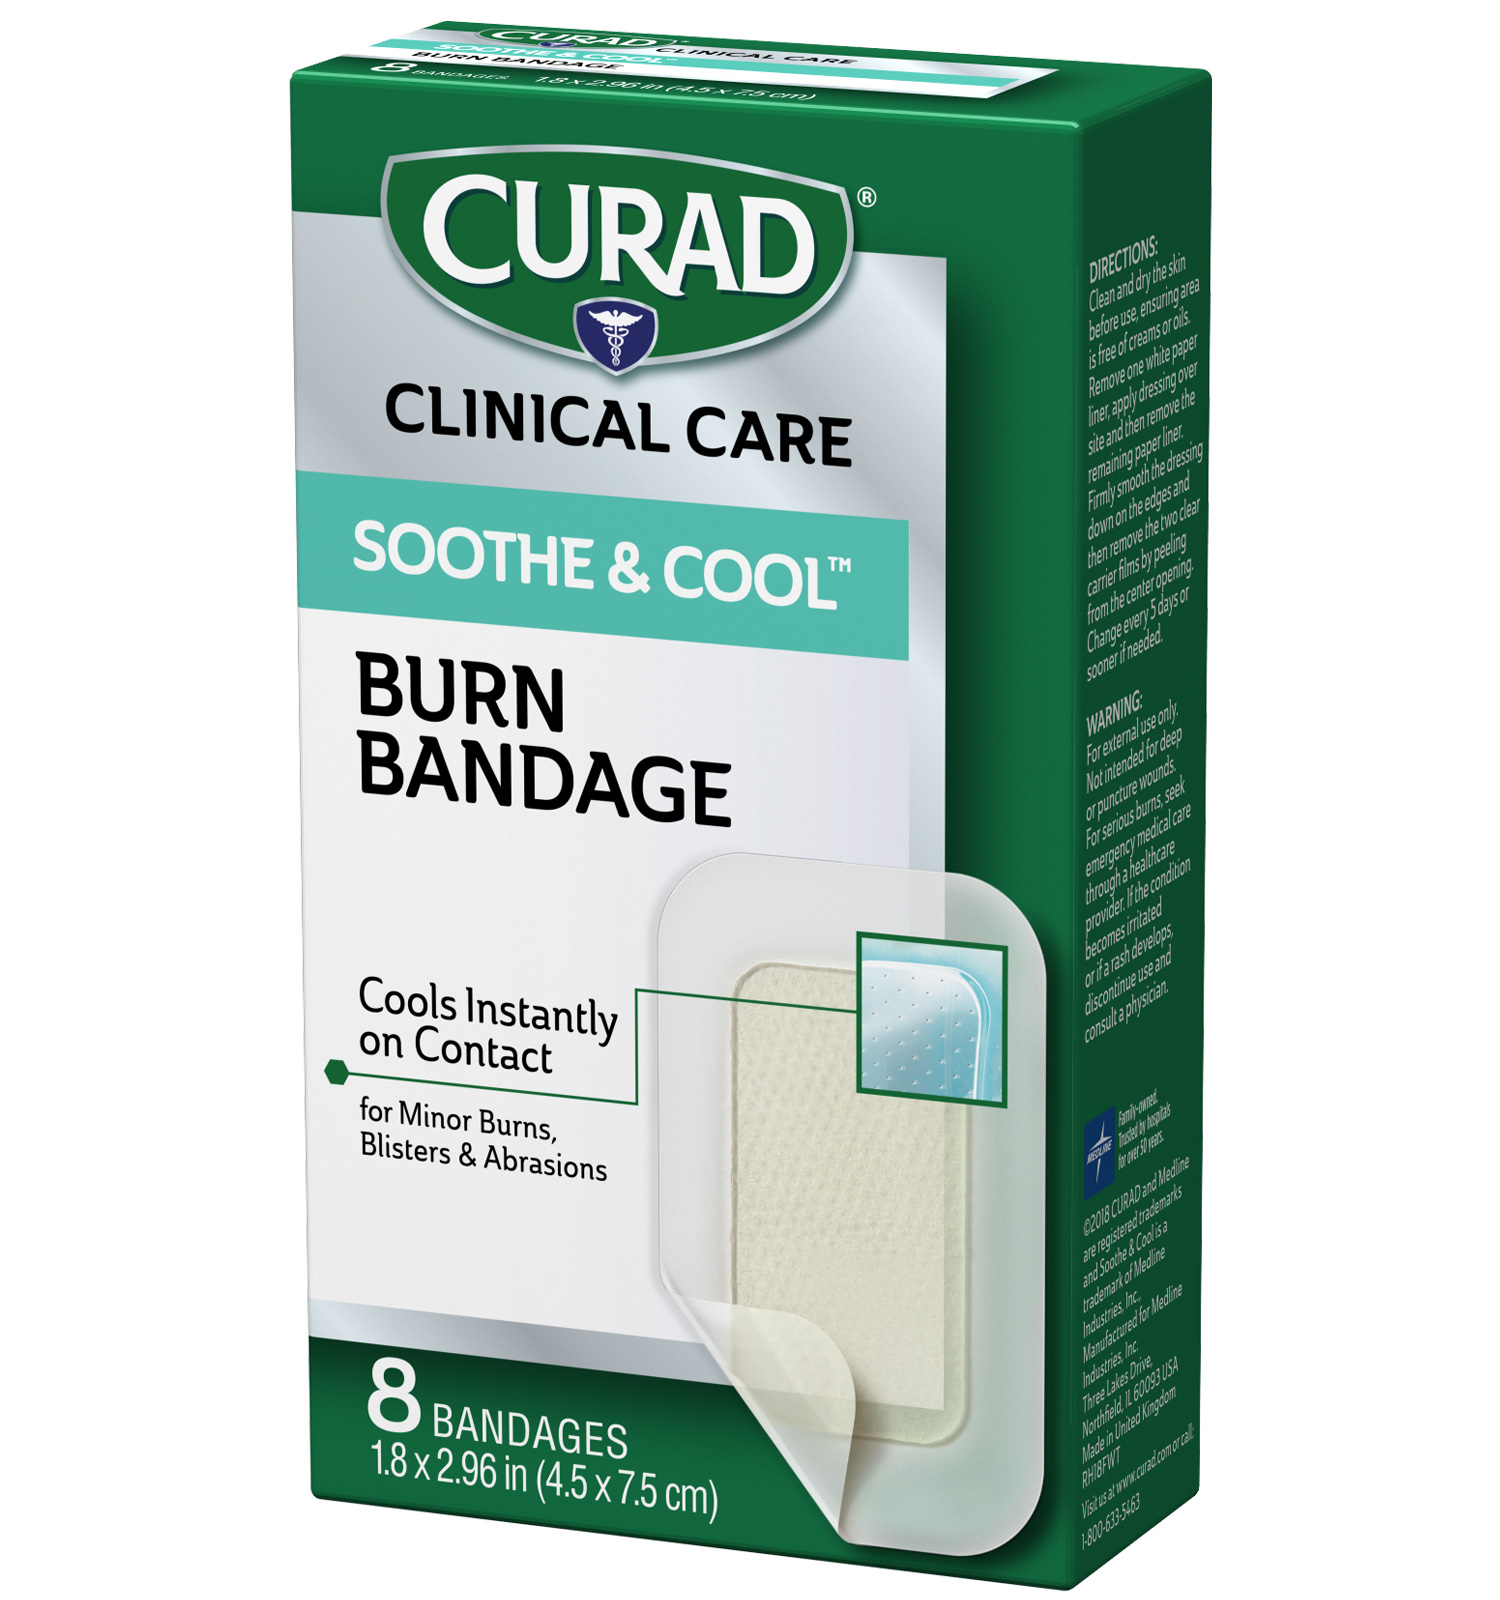 Soothe & Cool Burn Bandages, 2.96 x 1.8, 8 count